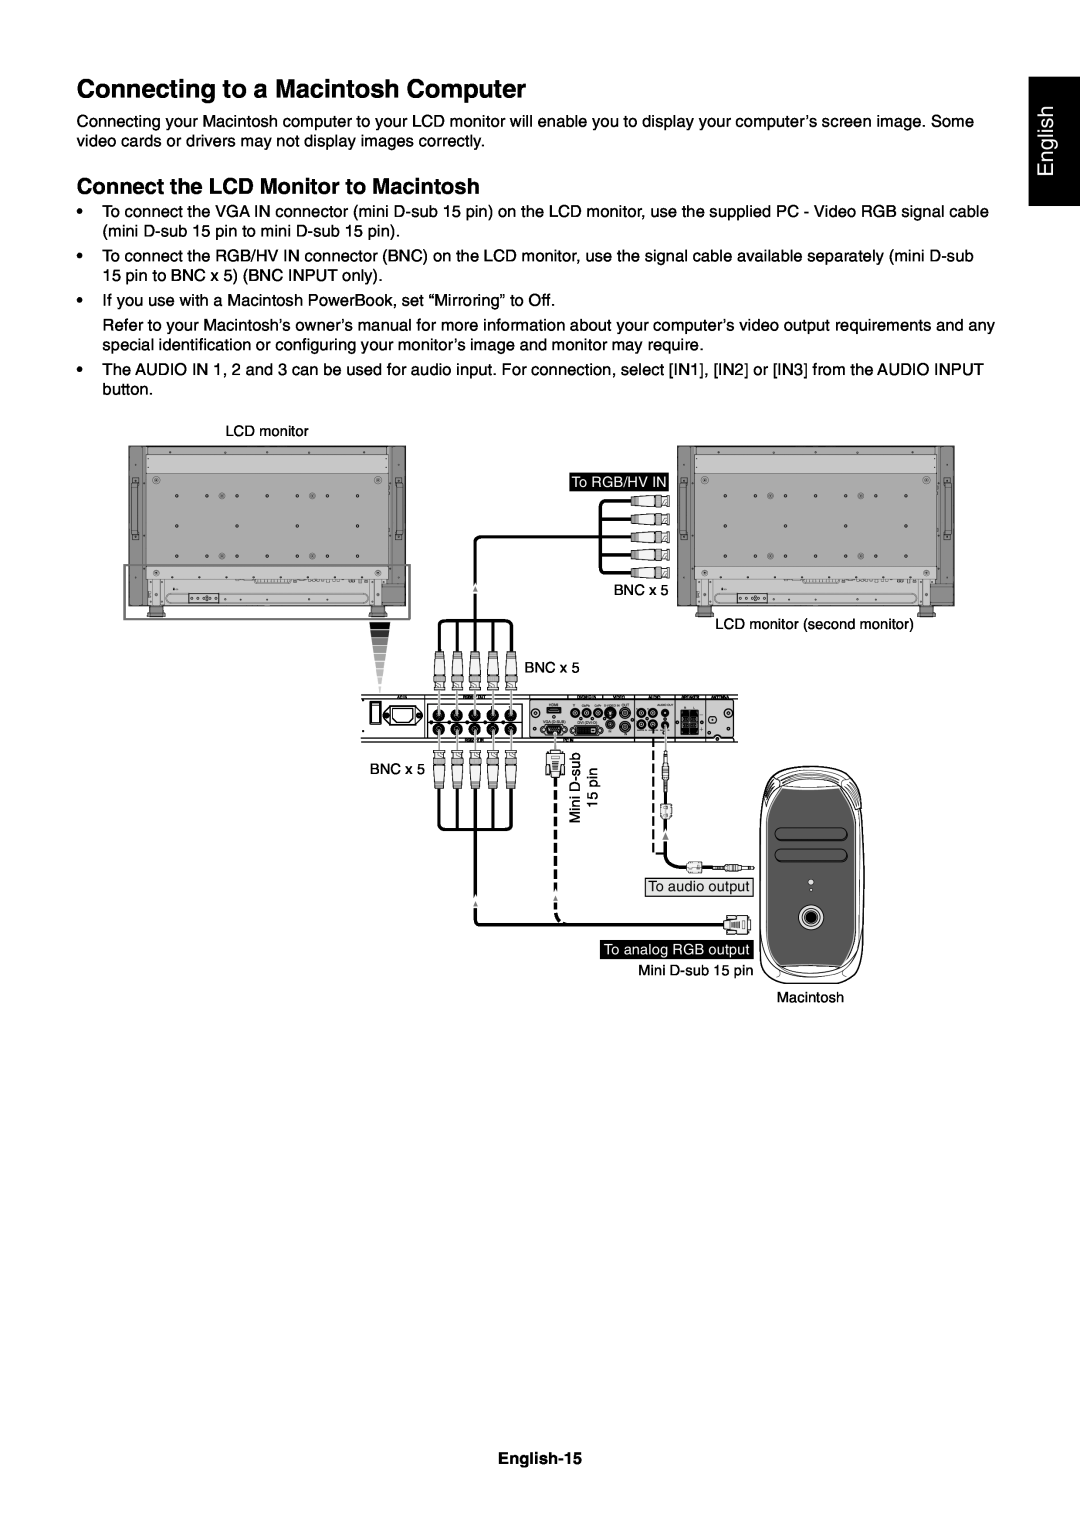 NEC LCD4020, LCD4620 user manual Connecting to a Macintosh Computer, Connect the LCD Monitor to Macintosh, English 